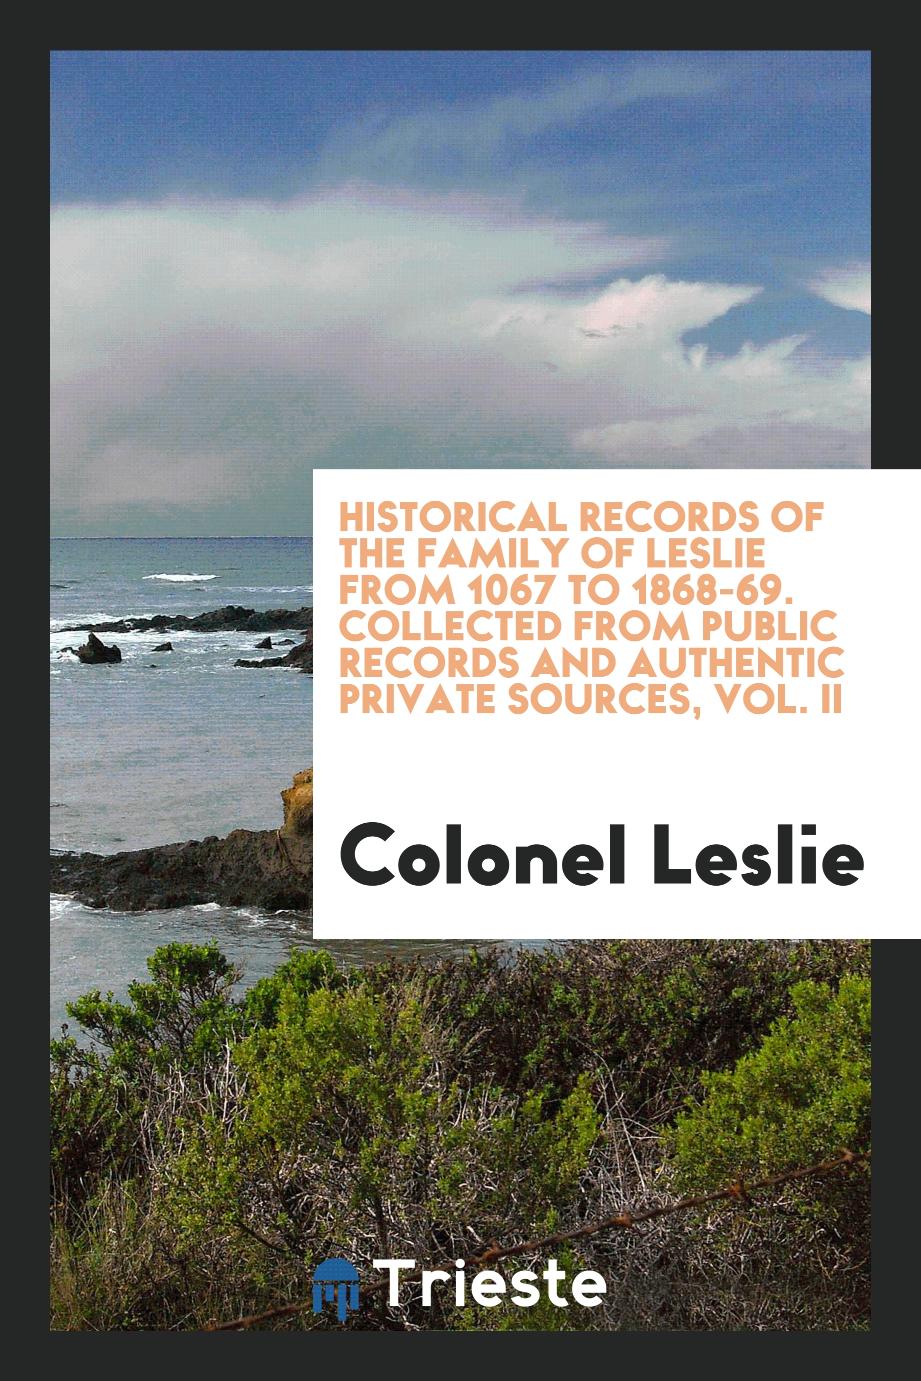 Historical records of the family of Leslie from 1067 to 1868-69. Collected from public records and authentic private sources, Vol. II